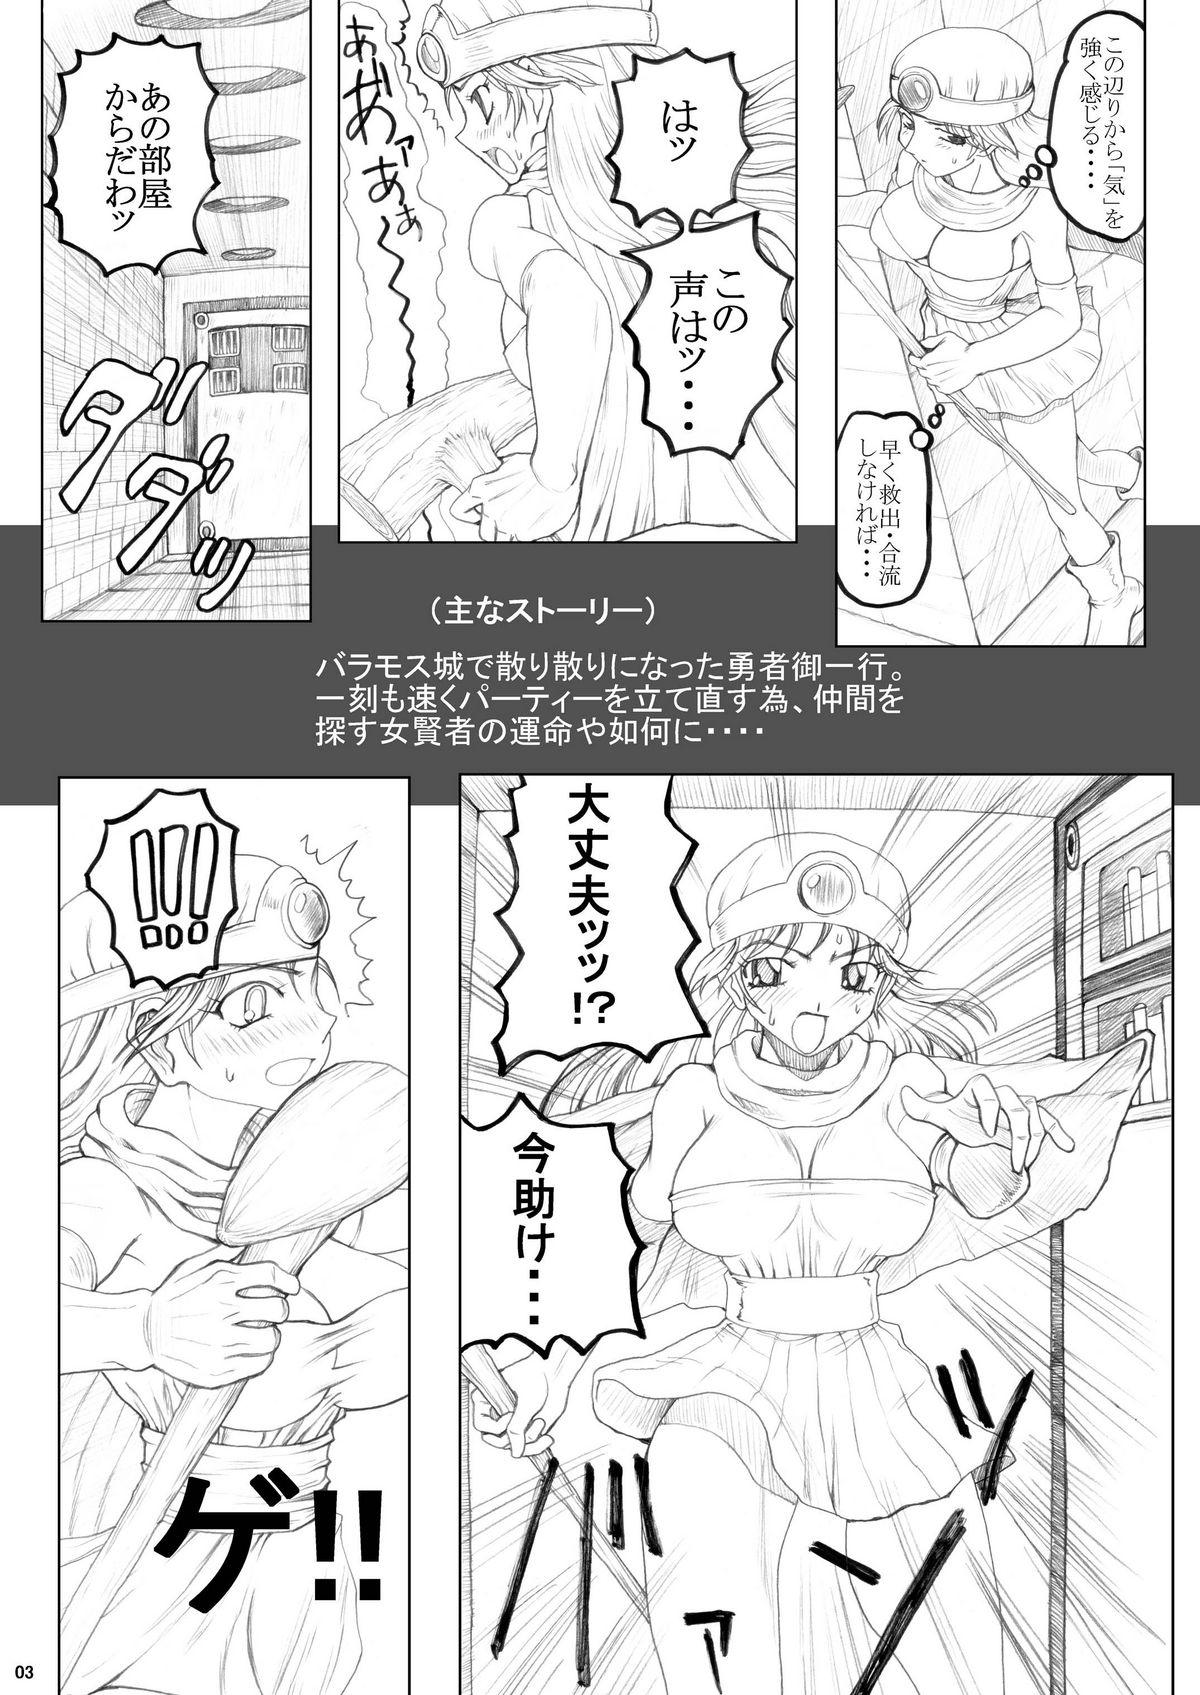 Hot Brunette Eikyuushi - Dragon quest iii Butthole - Page 3